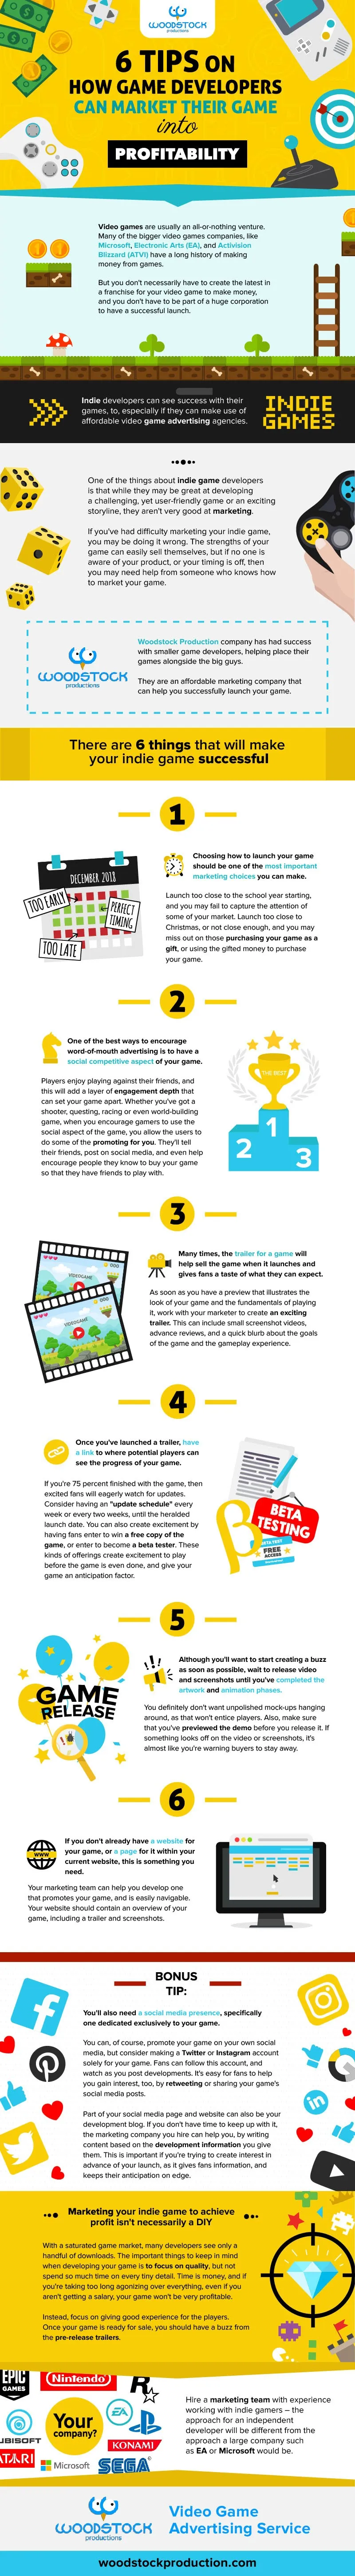 How to Market Your Video Game to Profitability - #infographic